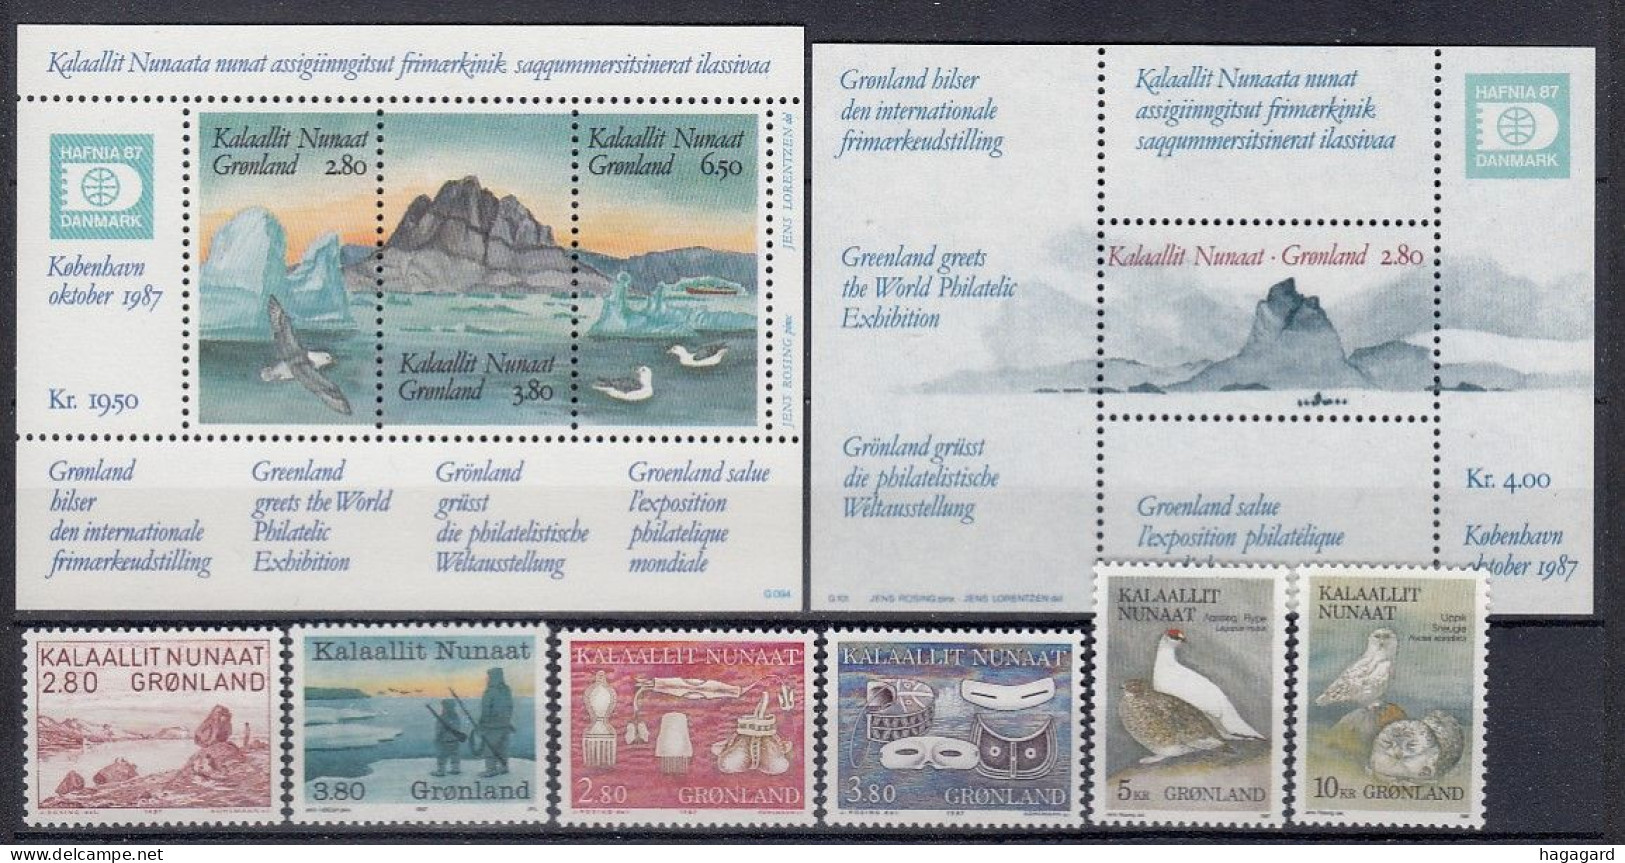 G2679. Greenland 1987. Complete Year Set. Michel 169-78. (20.20€). MNH(**) - Full Years